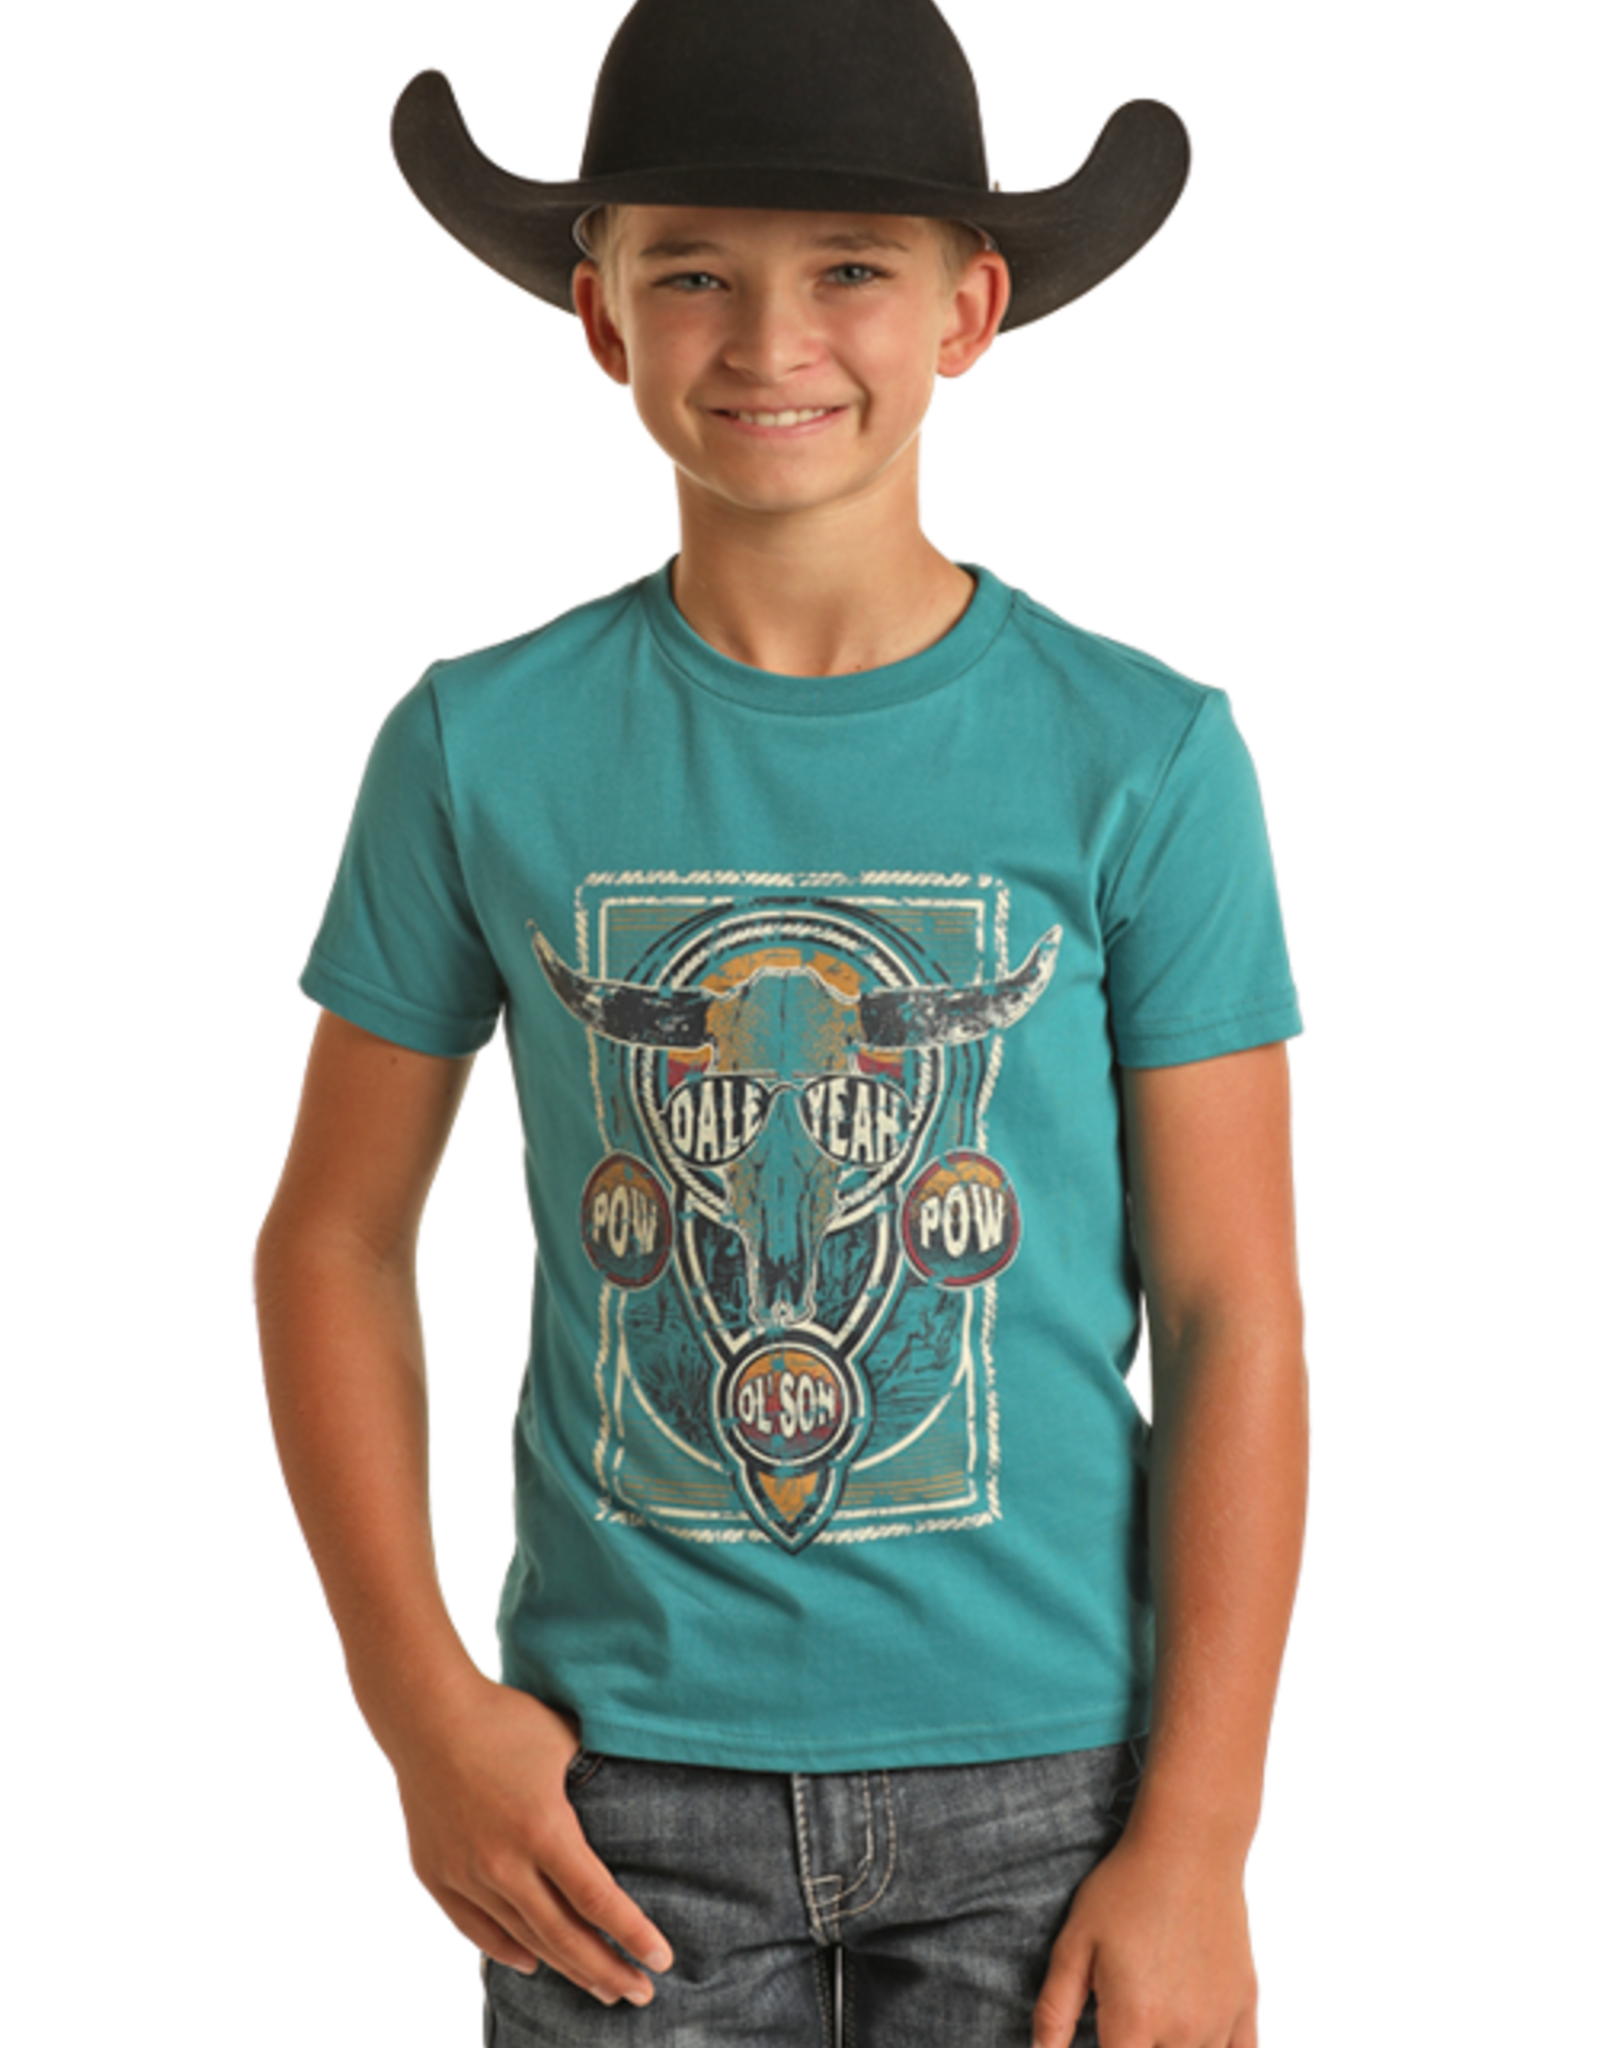 Boys Dale Brisby Pow Pow Turquoise Short Sleeve T Shirt